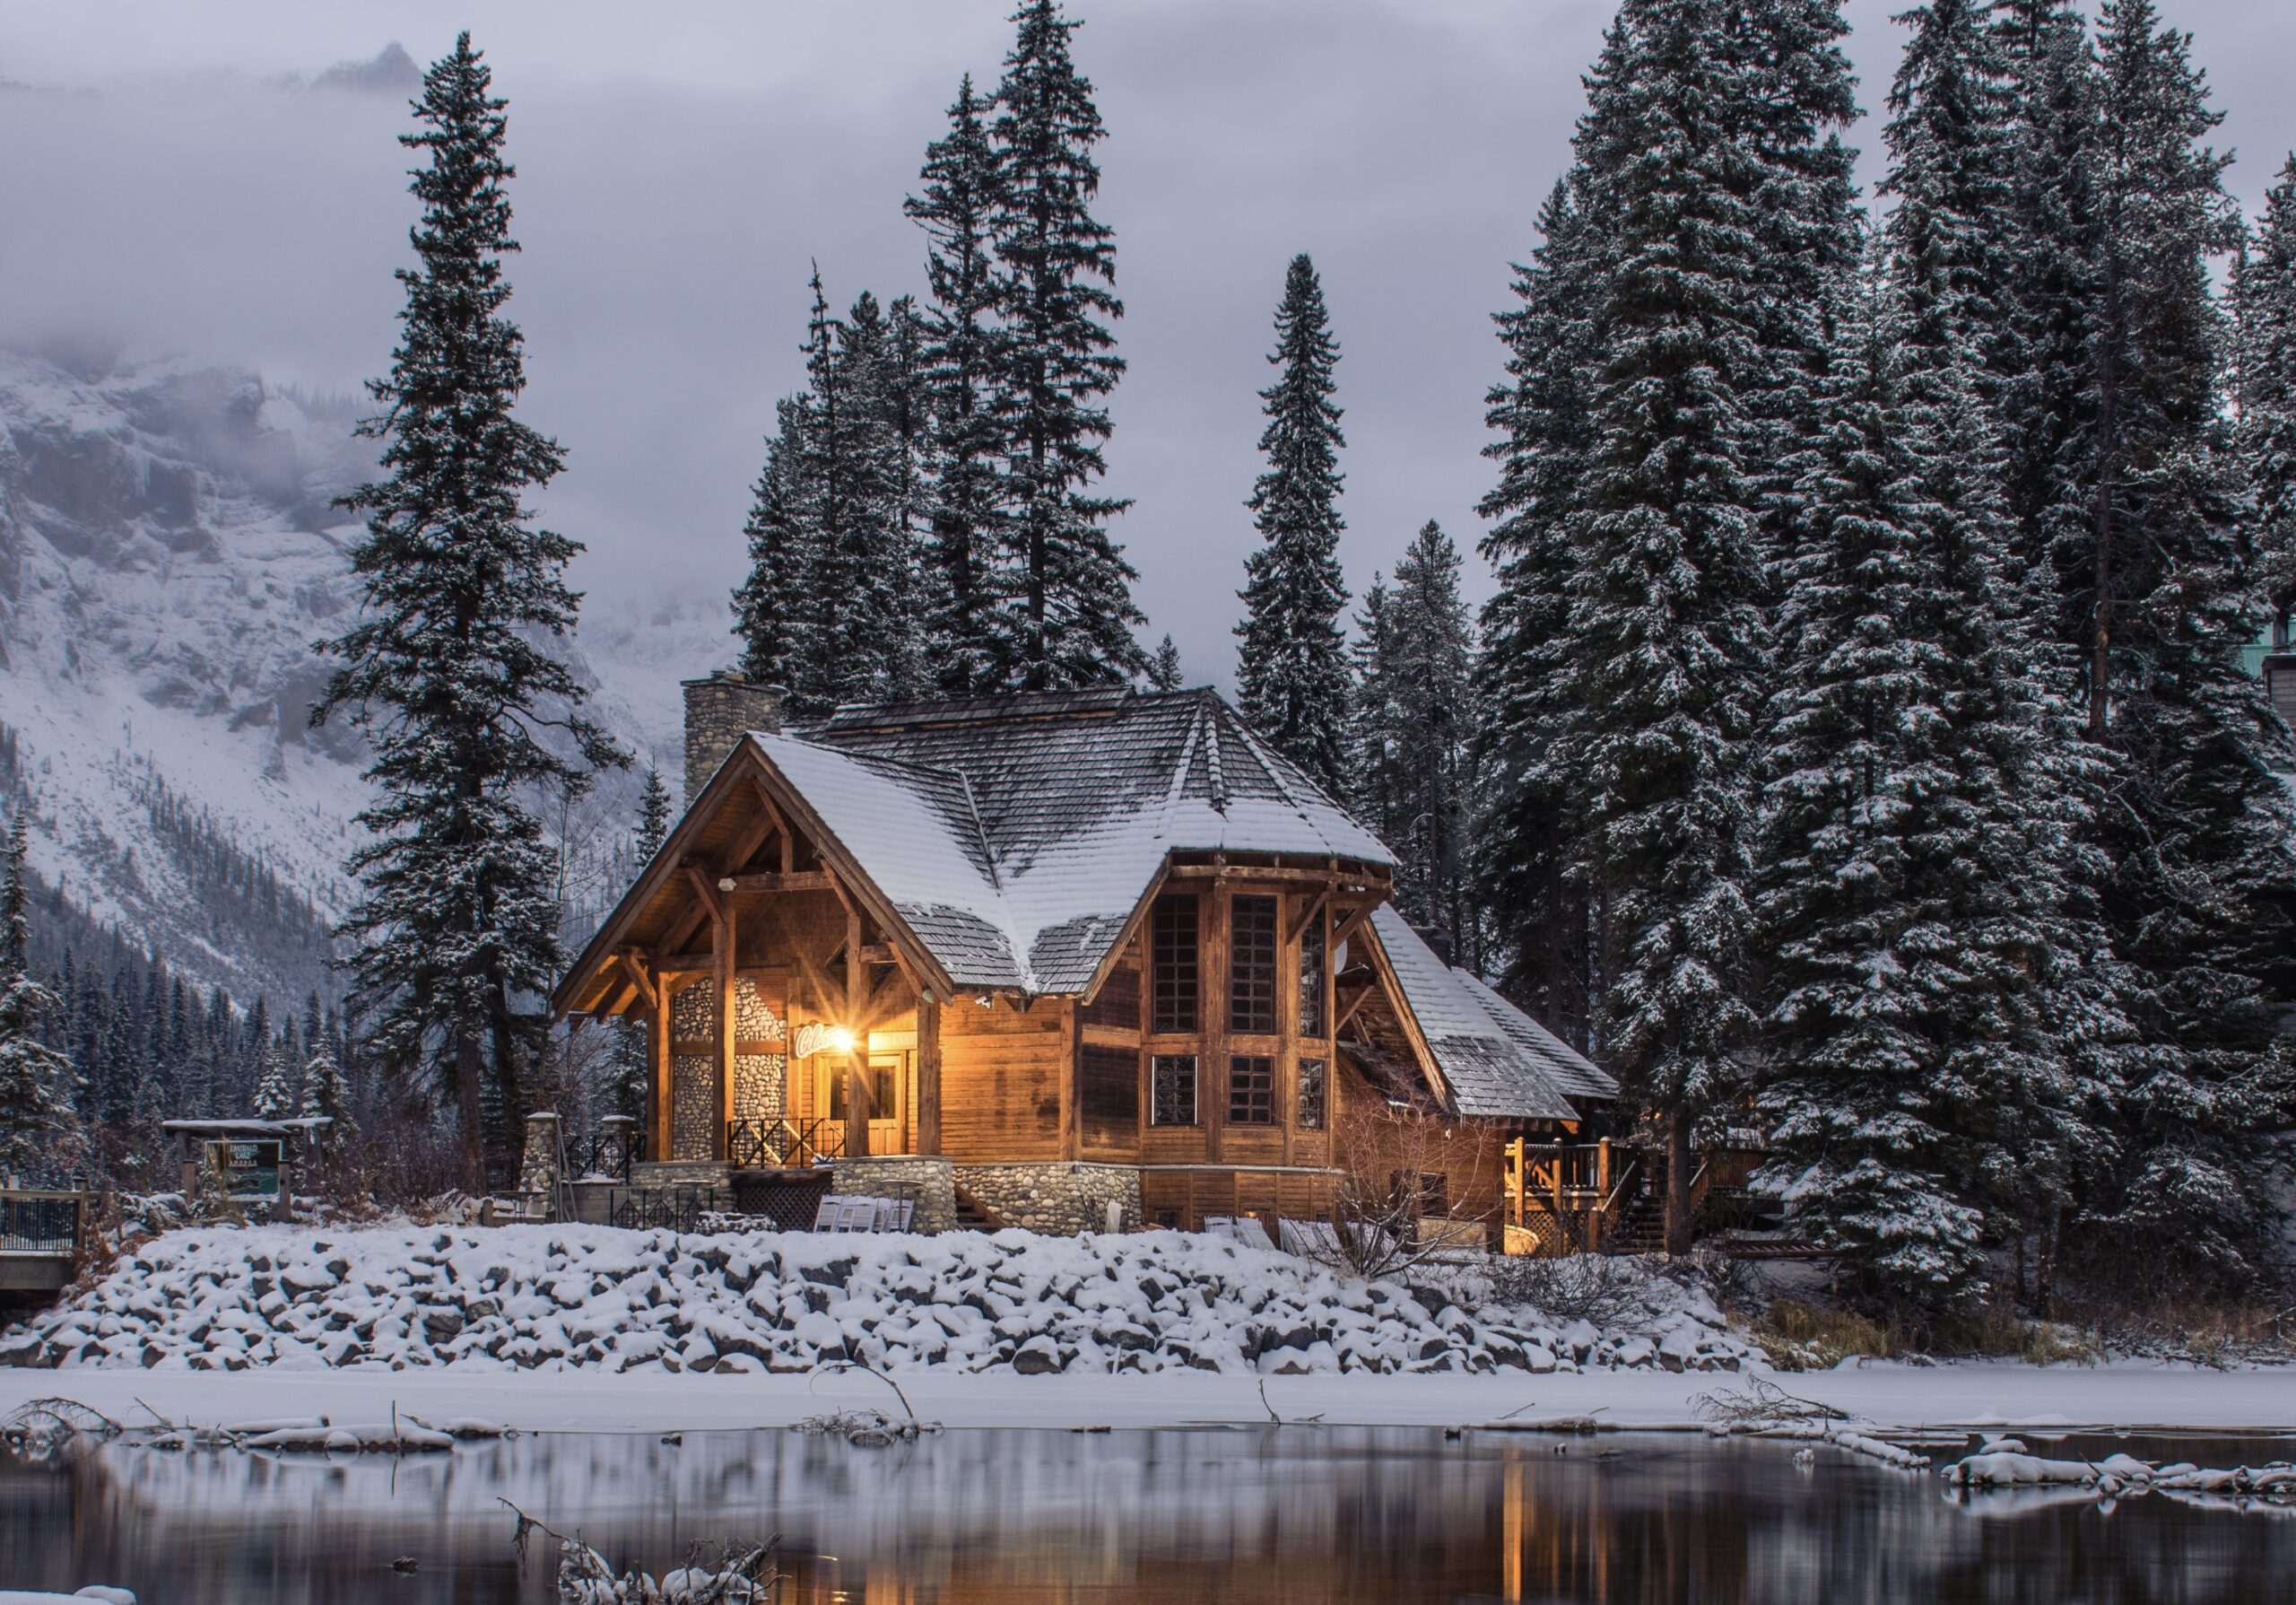 Check out these winter destinations perfect for January travel. 
Pictured: a wooden cabin surrounded by pine trees and snow